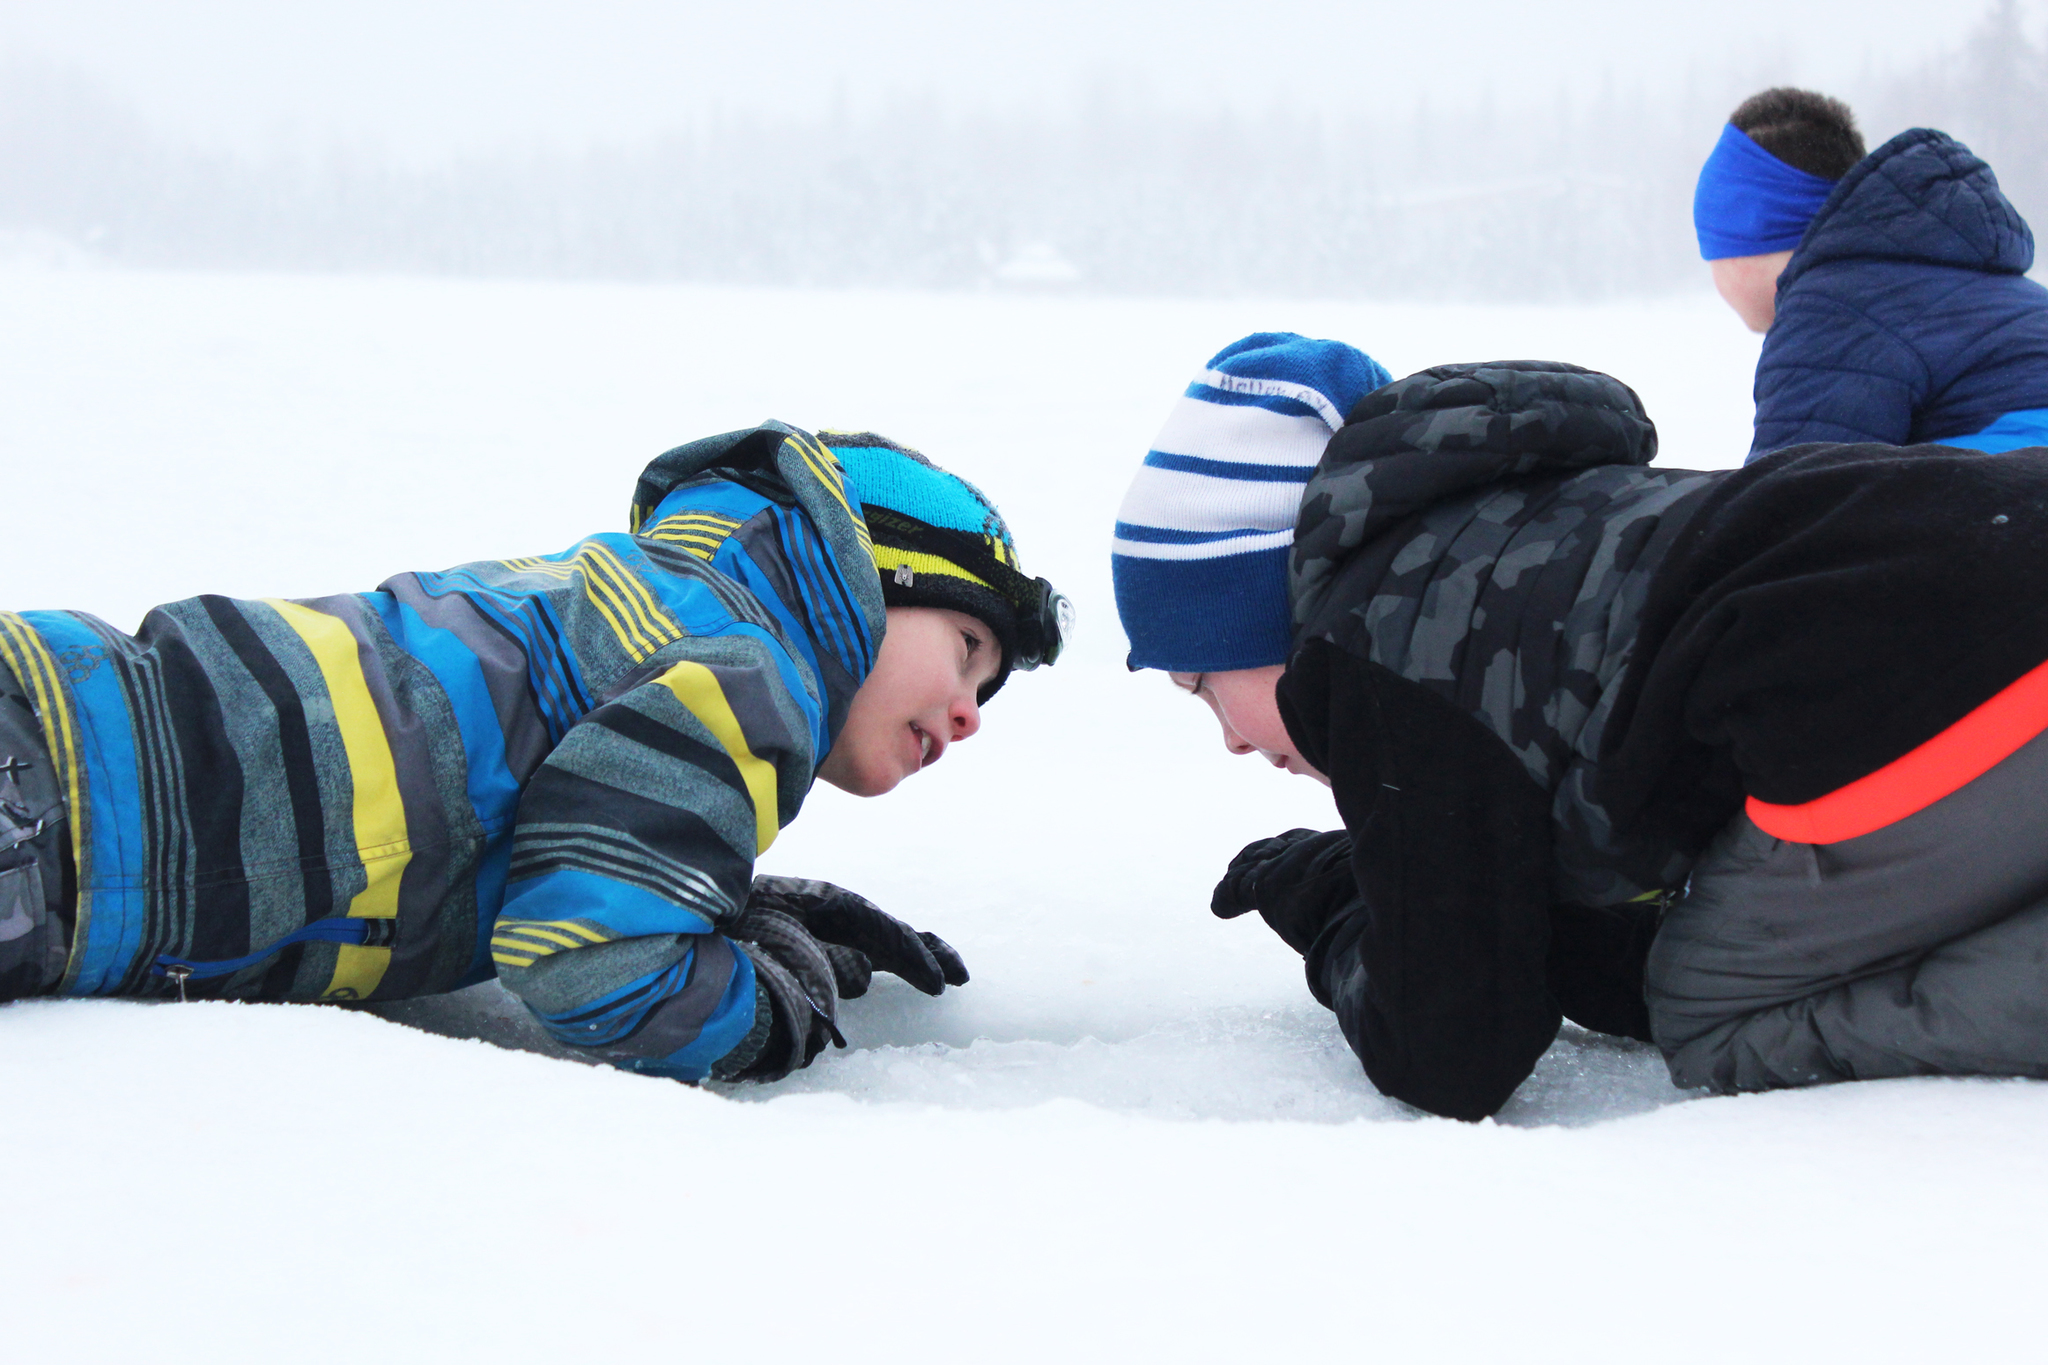 Third grader Ryder Lagerson, left, uses his headlight to help his Kaleidoscope School of Arts and Sciences classmate and Josiah Holloway, right, try to catch a fish during an ice fishing outing Friday, Feb. 24, 2017 at Sport Lake in Soldotna, Alaska. Hundreds of students from multiple Kenai Peninsula School District schools take part in the Alaska Department of Fish and Game's "Salmon in the Classroom" program each year, which includes three ice fishing outings in the winter. (Megan Pacer/Peninsula Clarion)